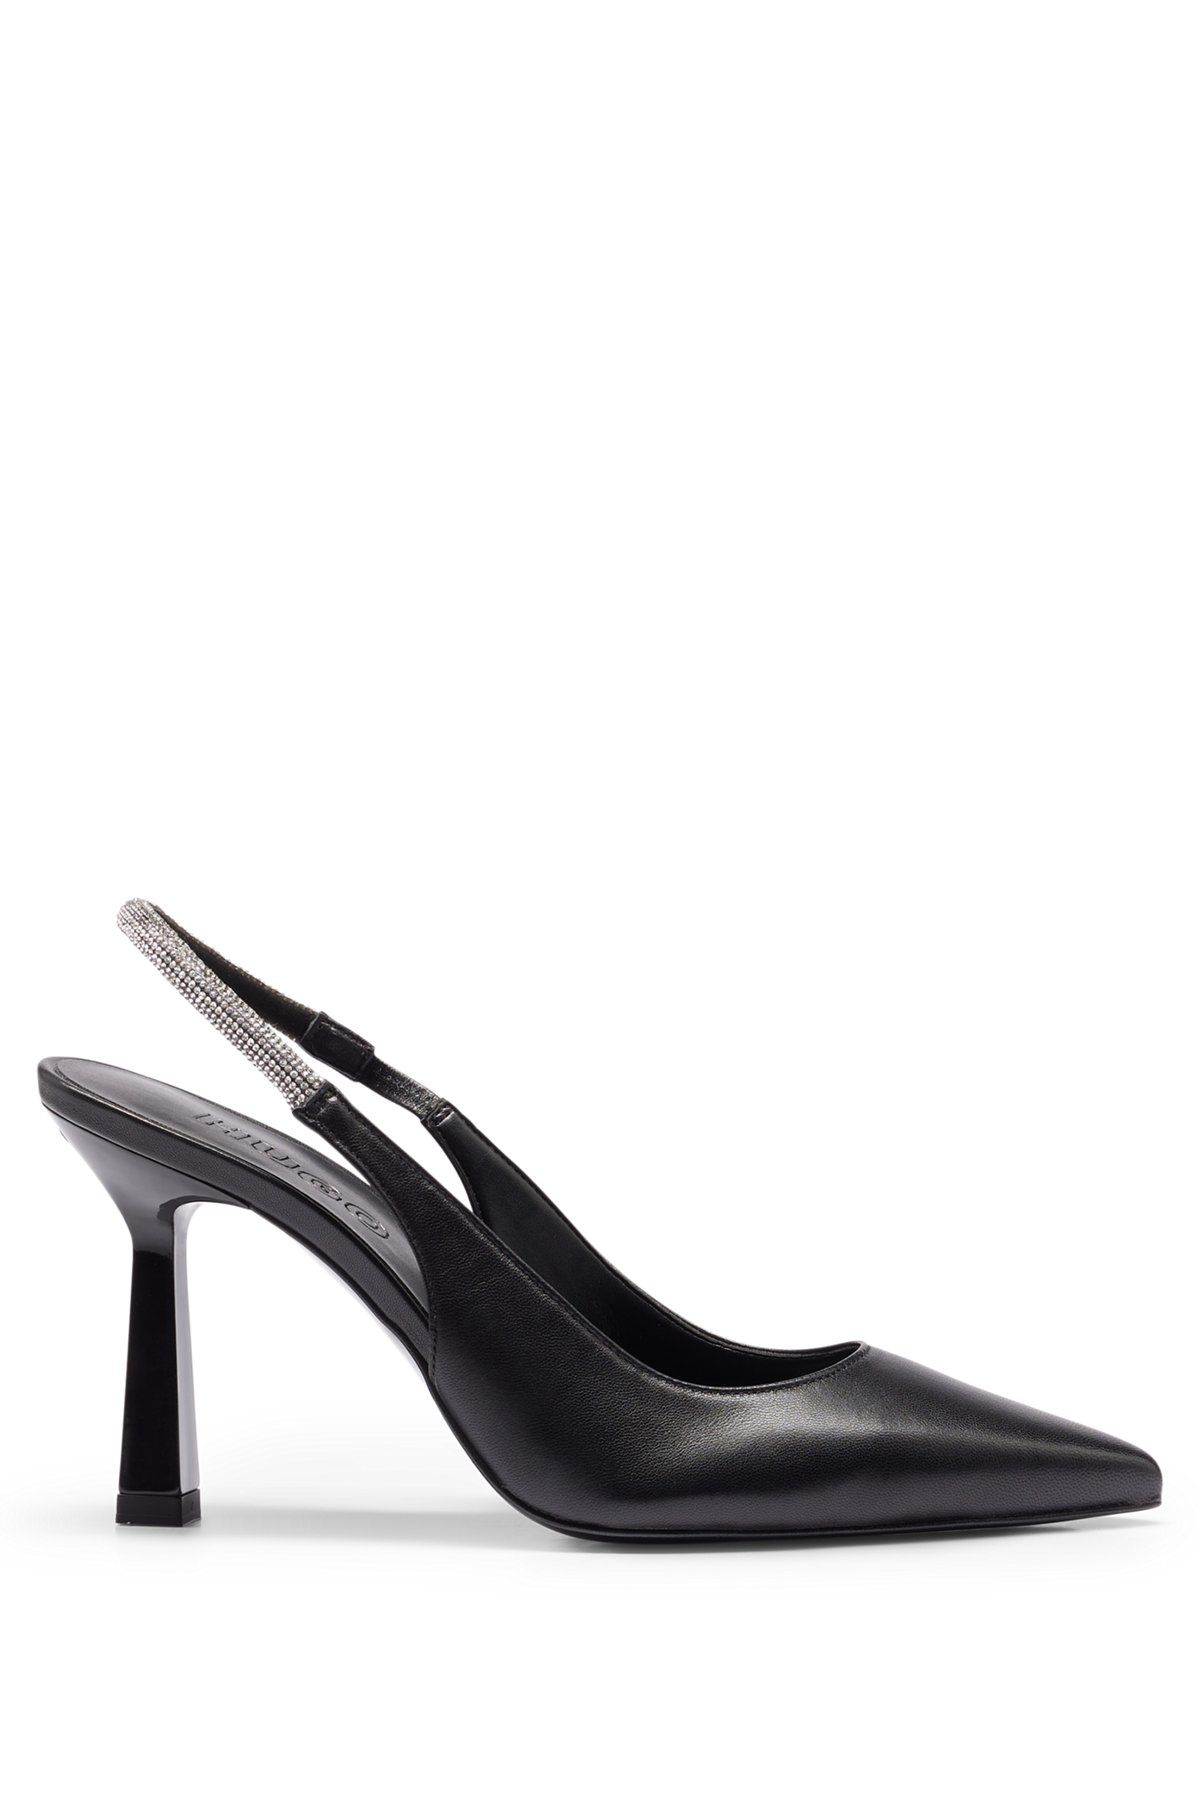 Nappa-leather pumps with crystal slingback strap, Black